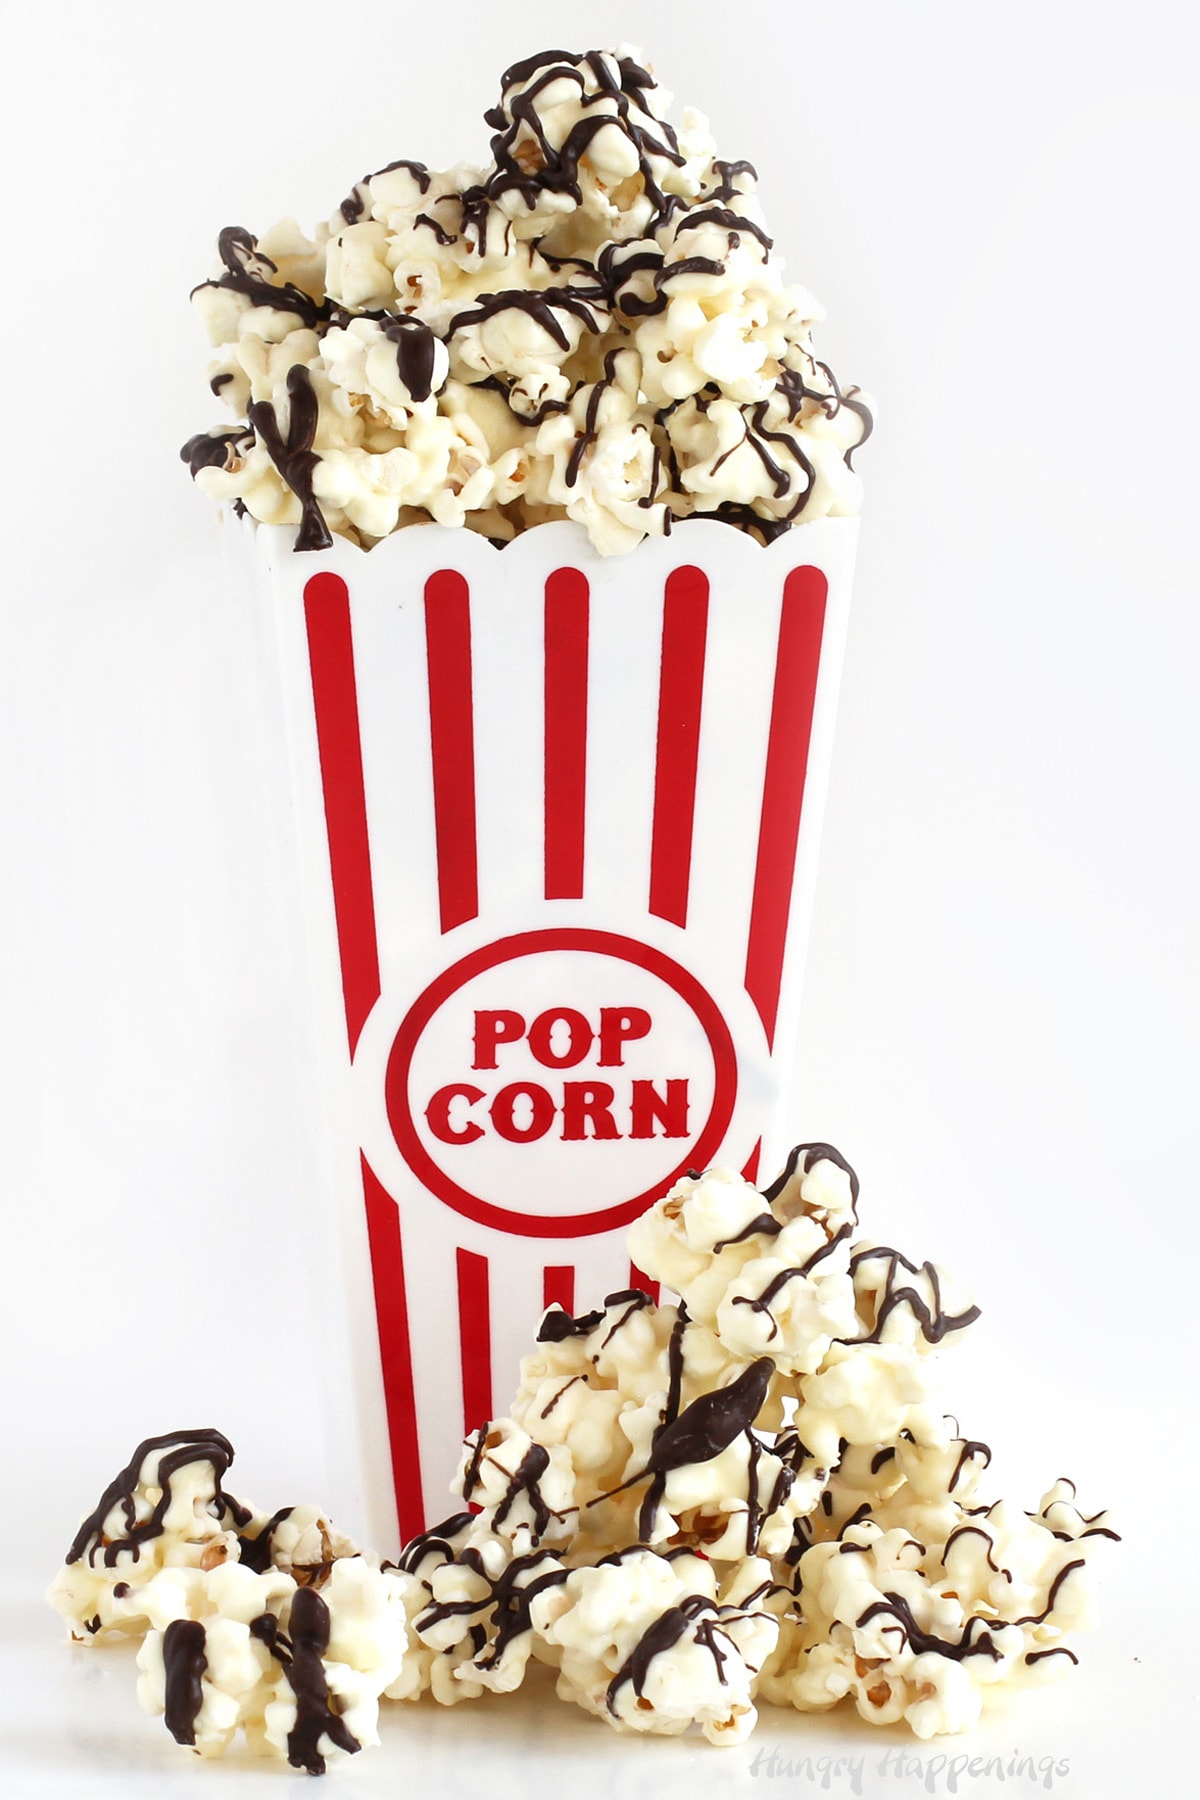 Chocolate popcorn in a red and white striped popcorn box is coated in white chocolate and drizzled with dark chocolate.